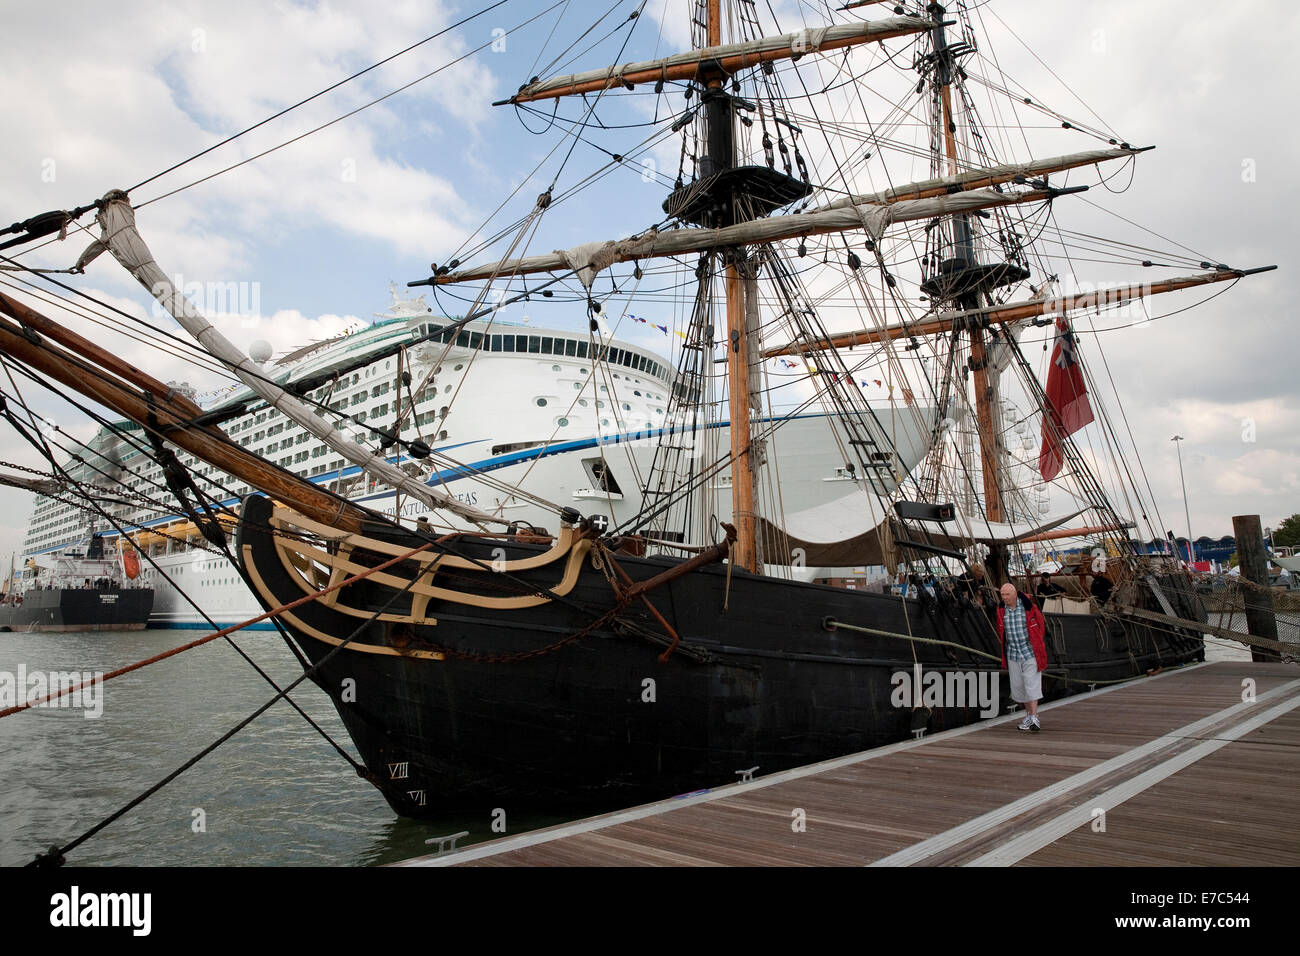 Tall ship Phoenix docks in front of the adventure of the seas cruise ship at the Southampton boat show 2014 Stock Photo